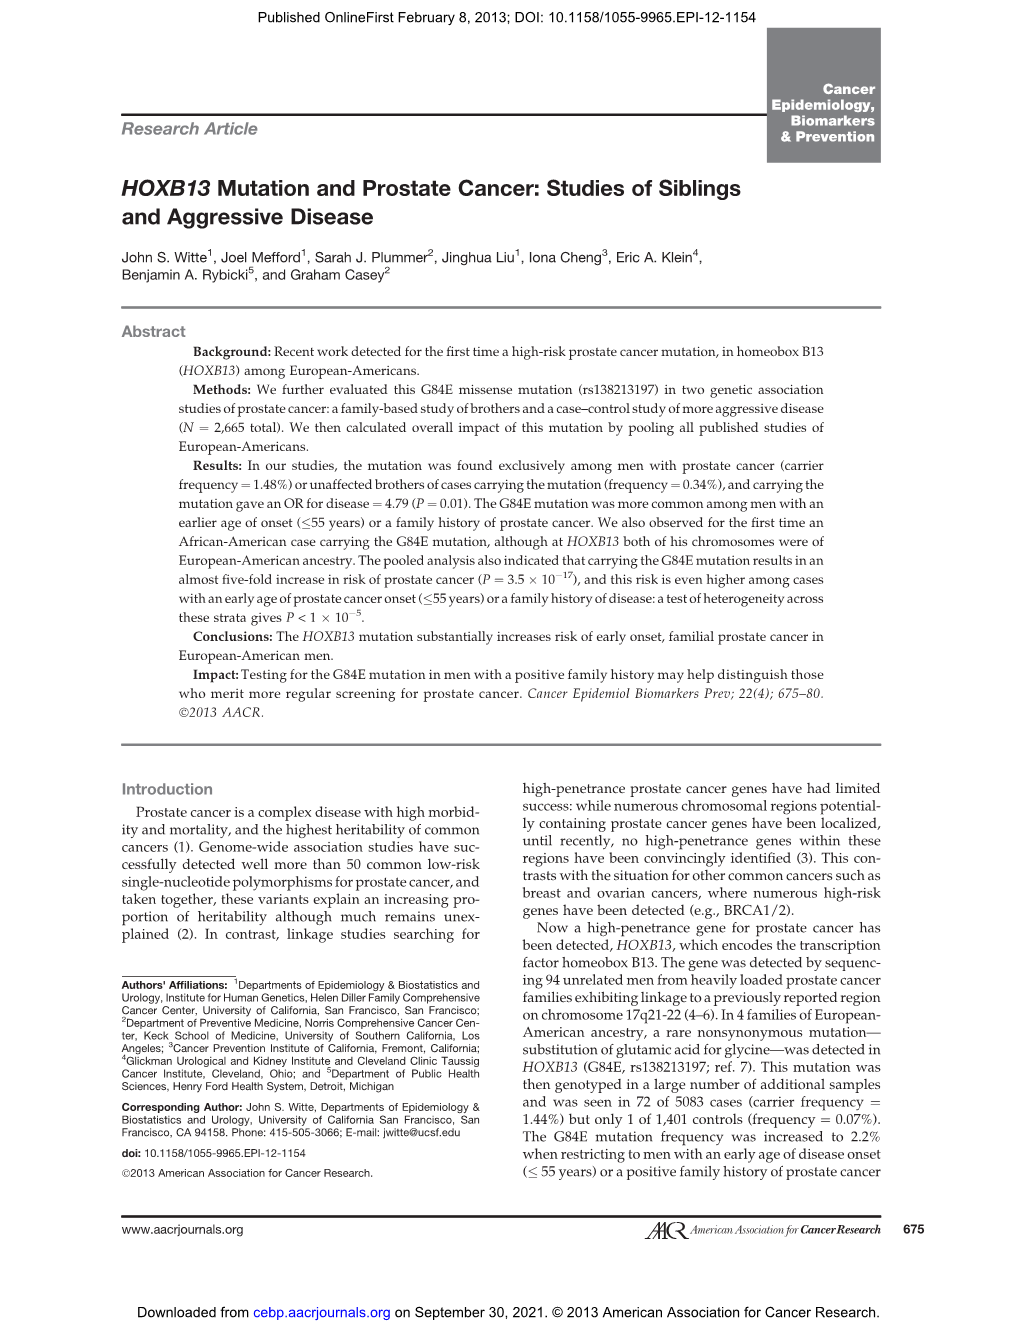 HOXB13 Mutation and Prostate Cancer: Studies of Siblings and Aggressive Disease